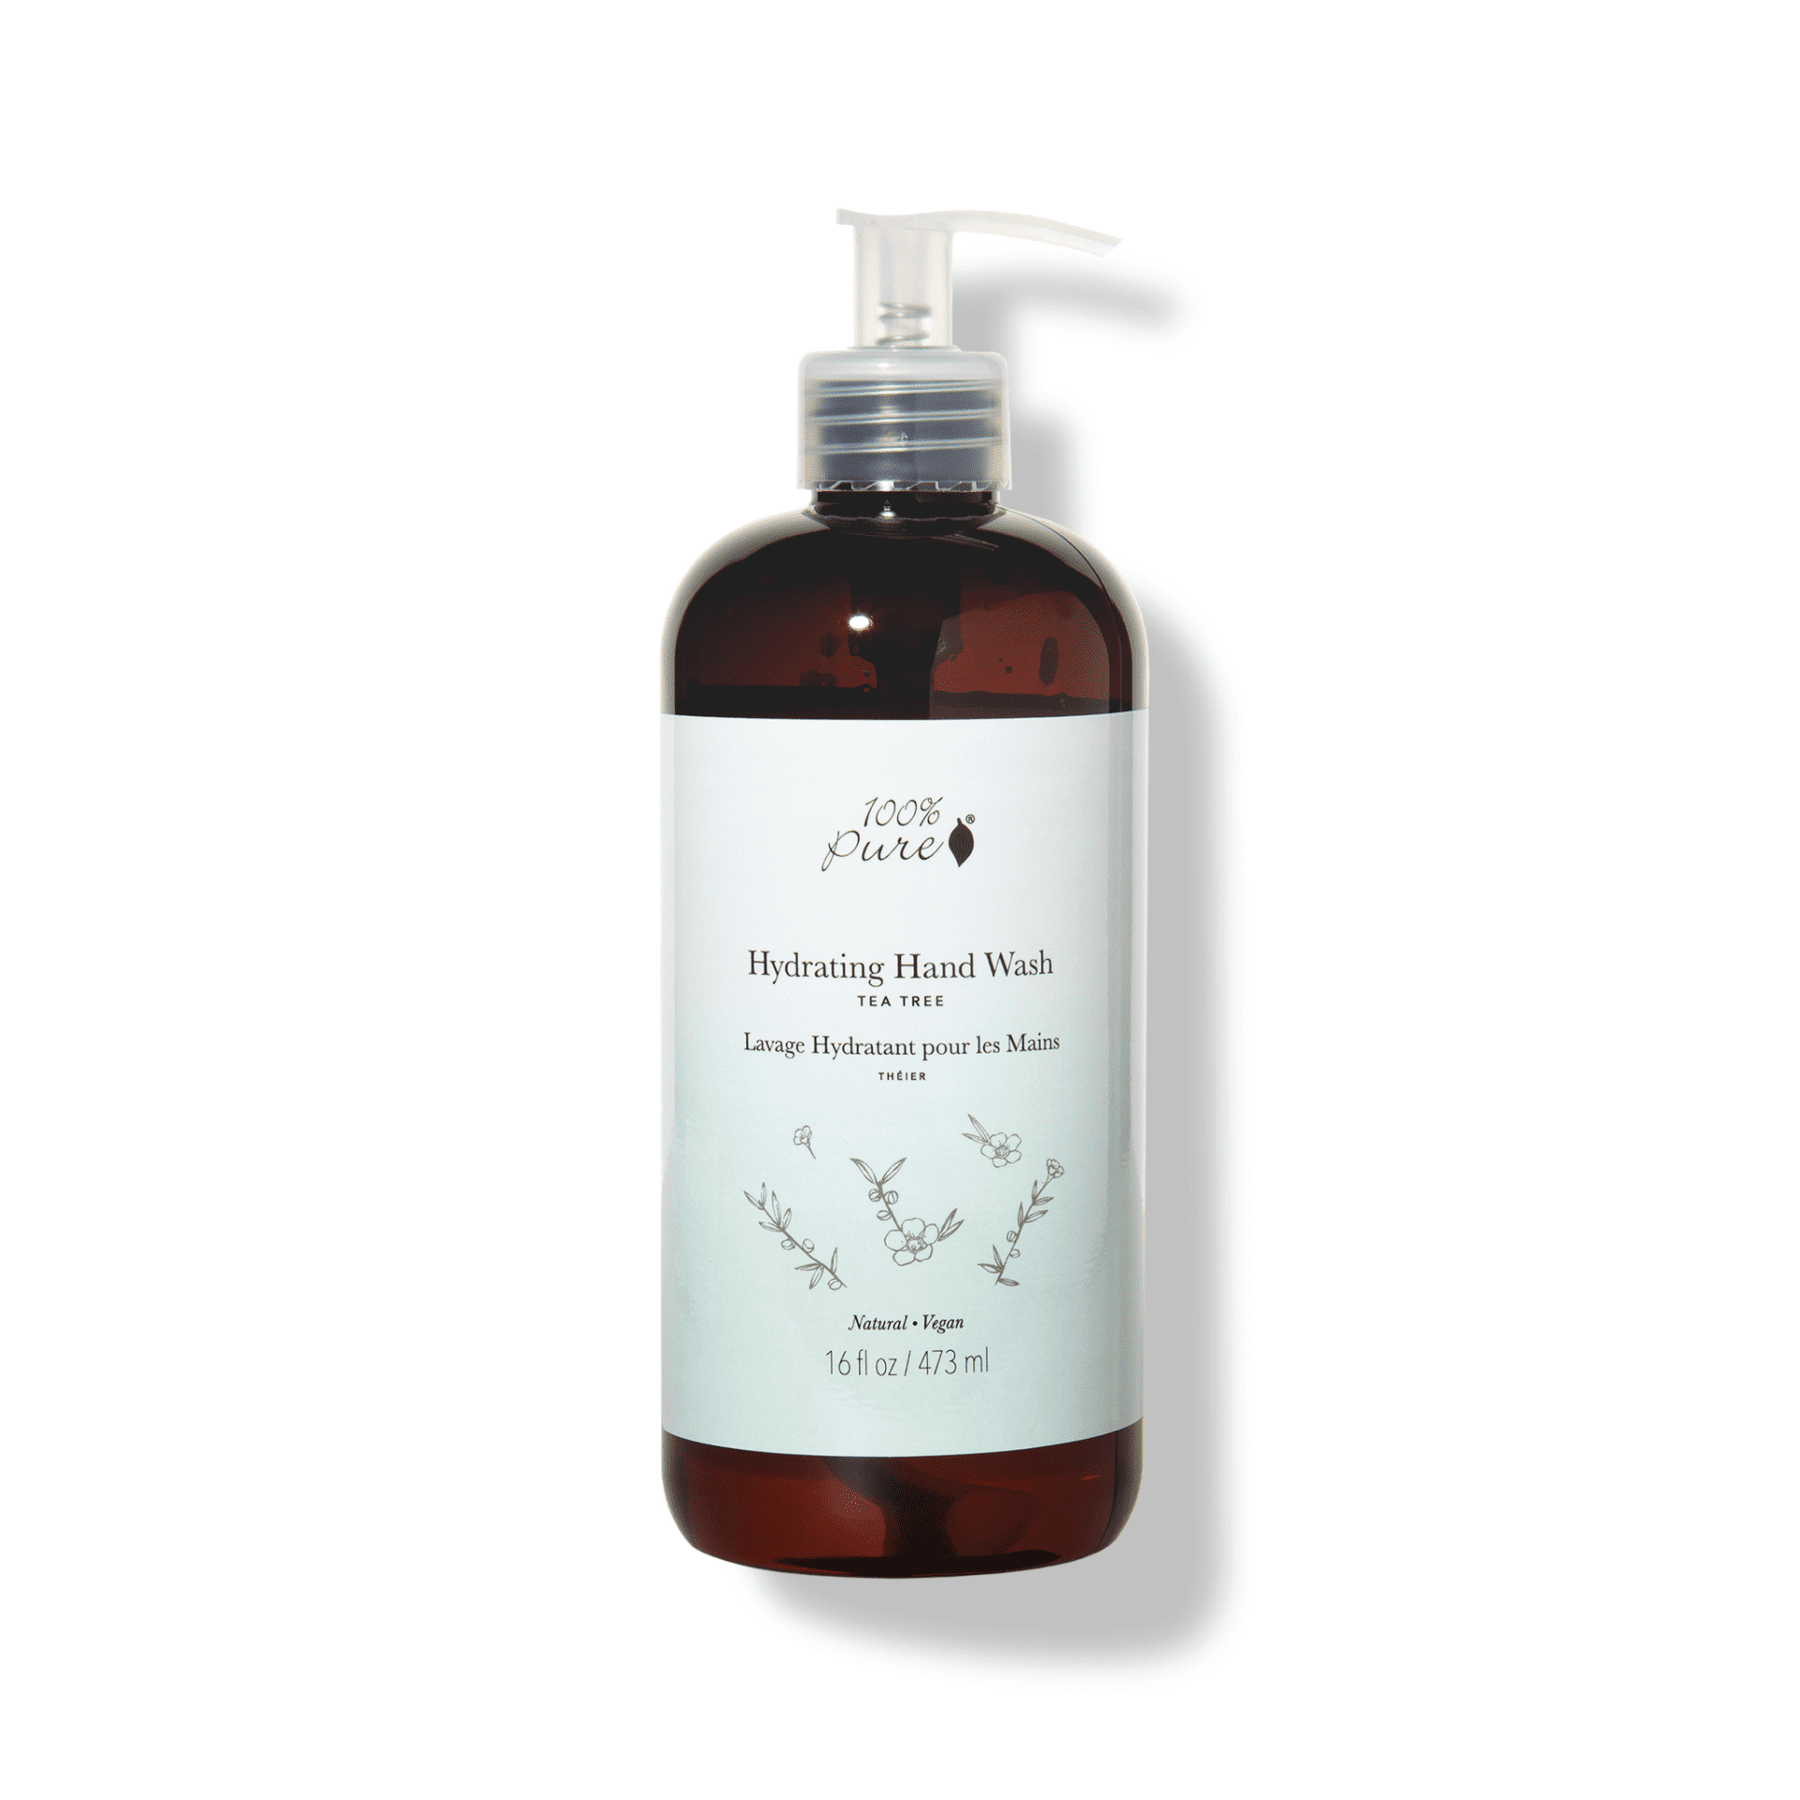 Hydrating Hand Wash That Leaves Your Skin Smooth And Yet Clean.